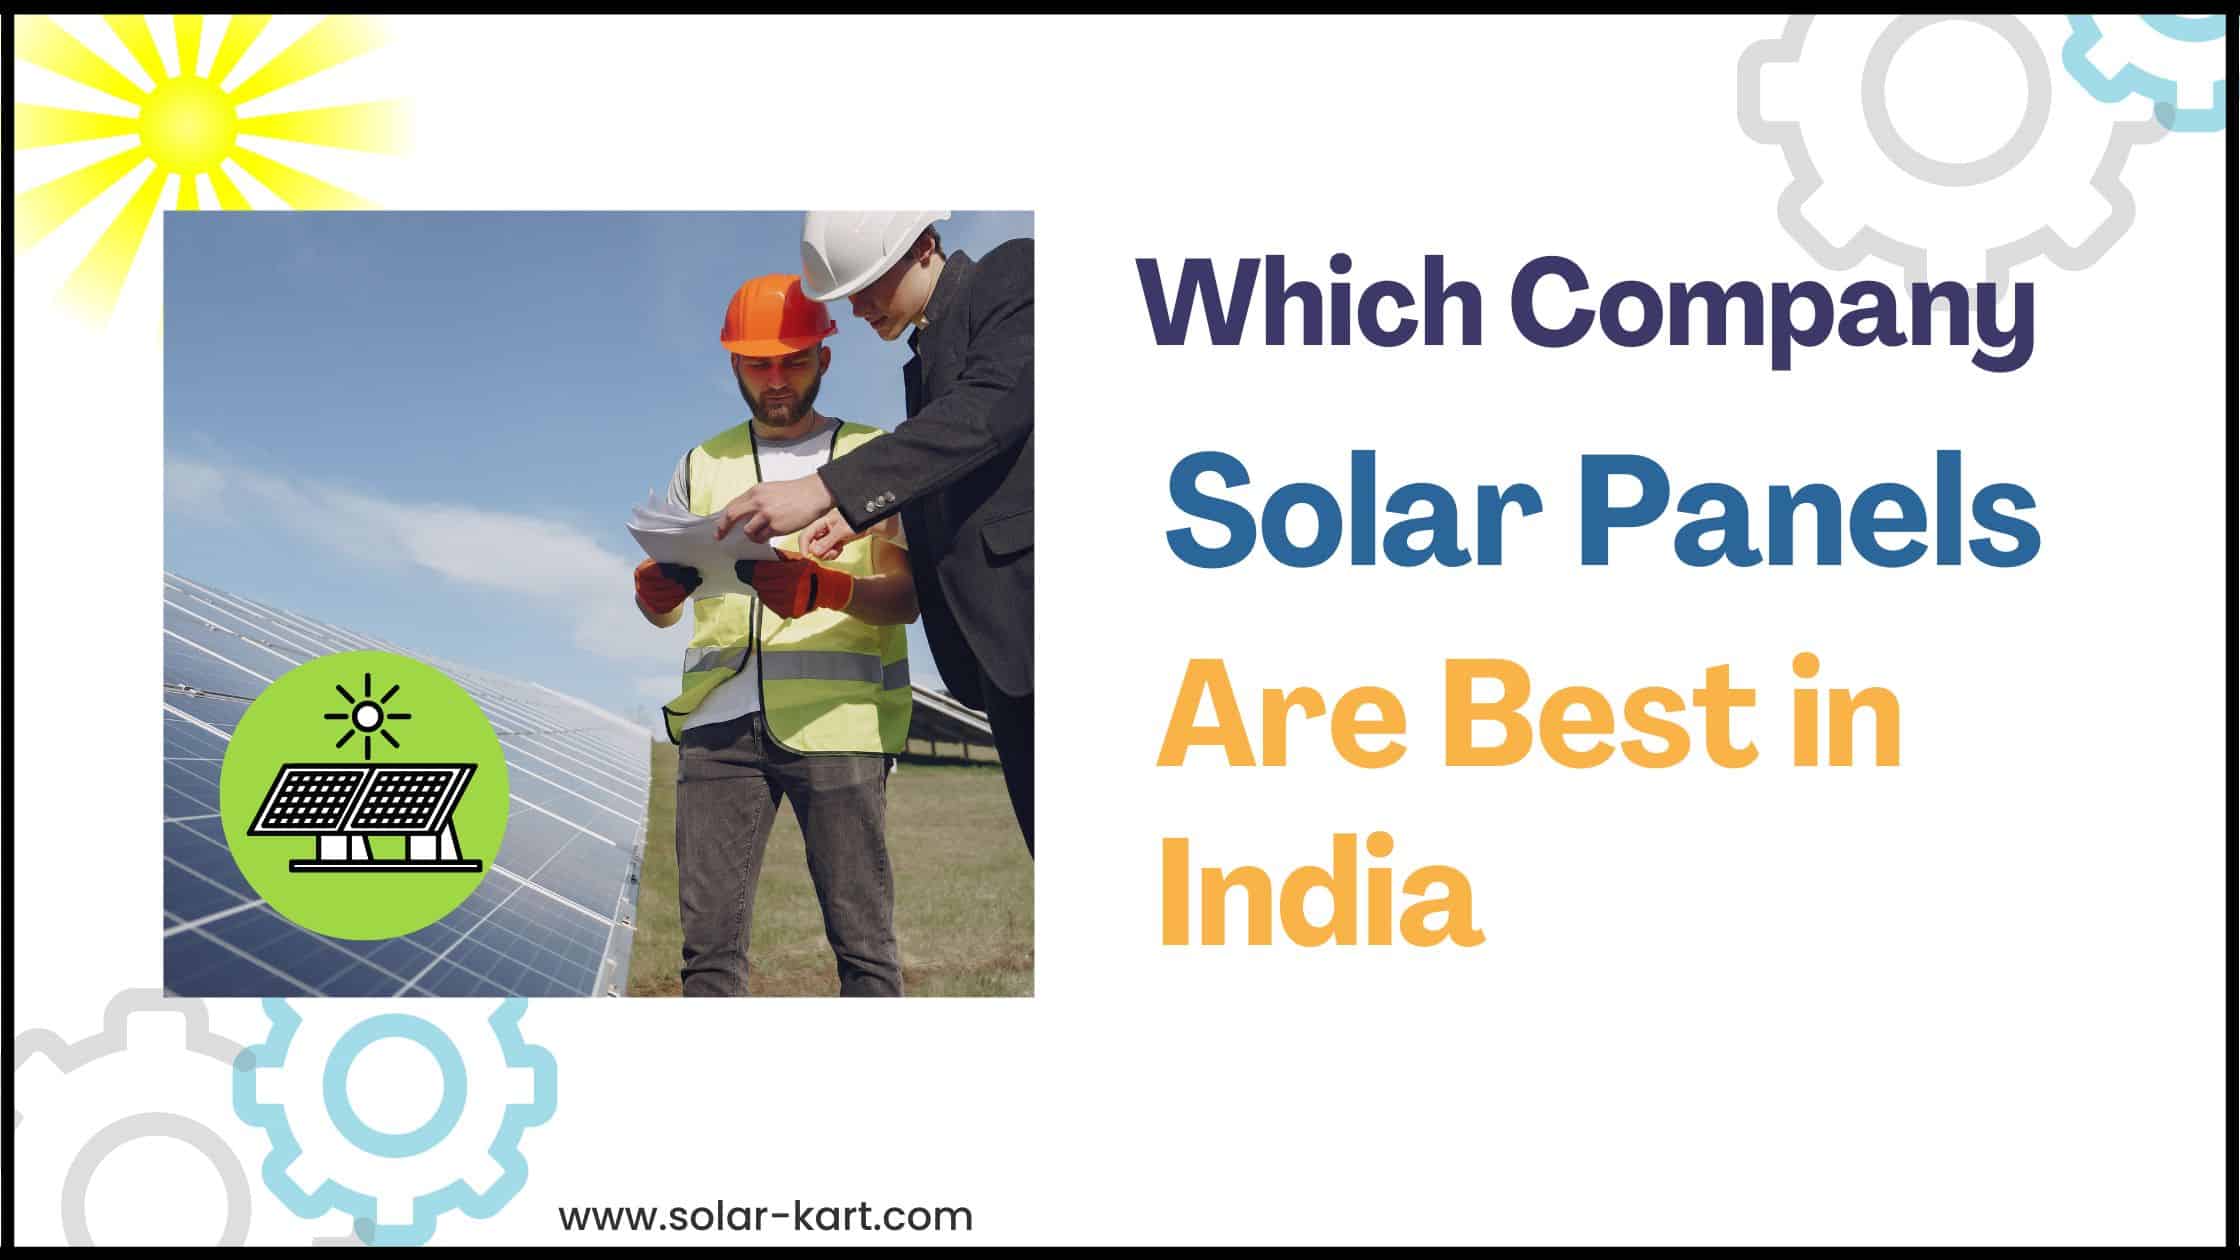 Which Company Solar Panels Are Best in India?